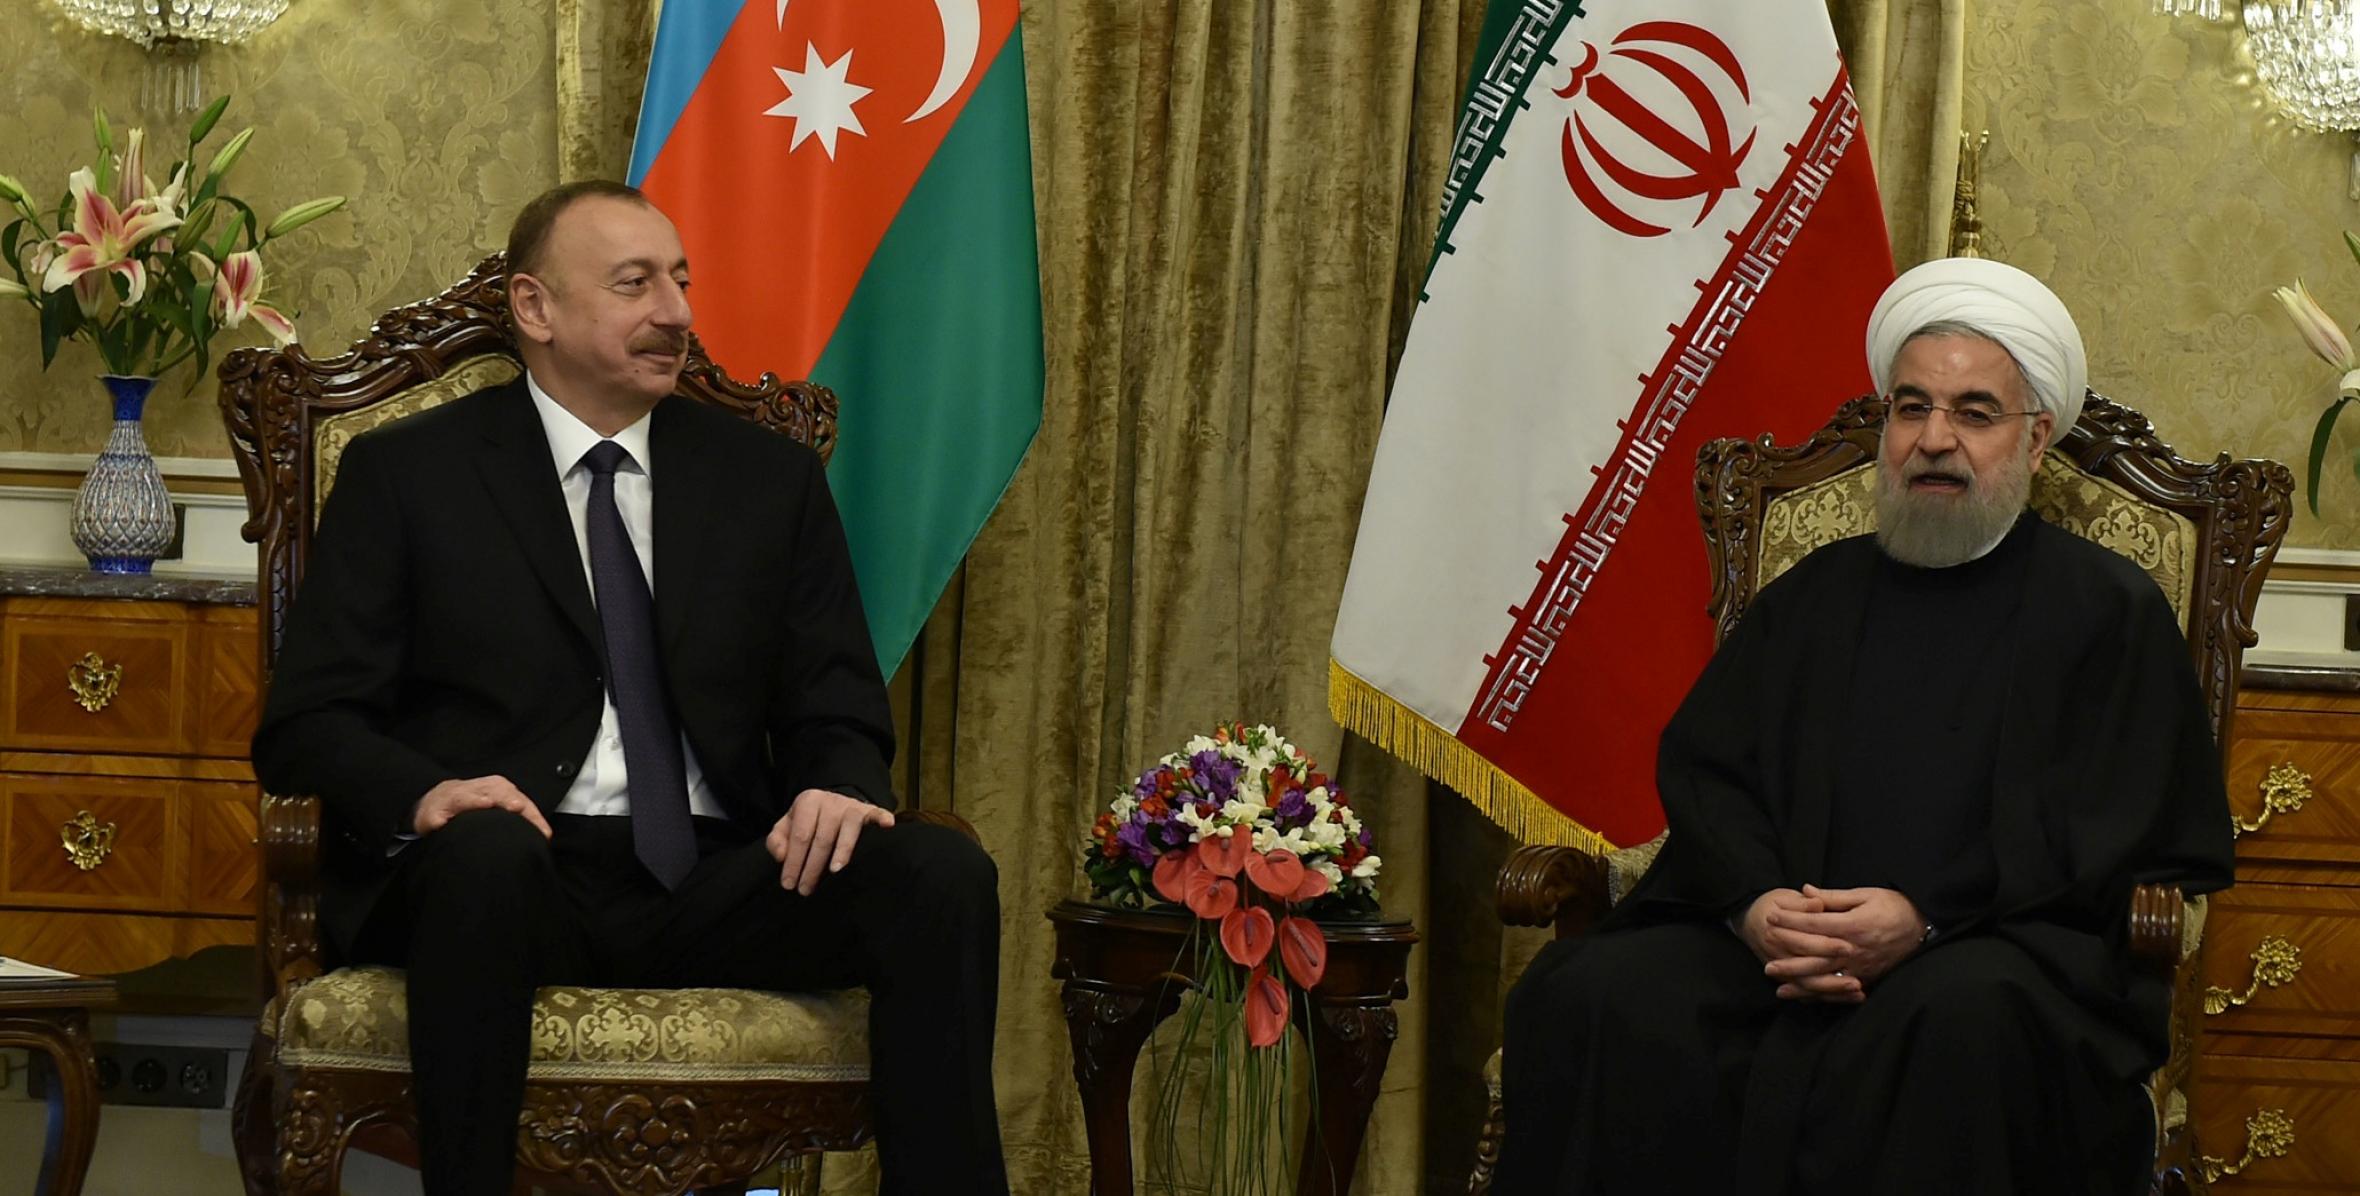 Presidents of Azerbaijan and Iran held a one-on-one meeting